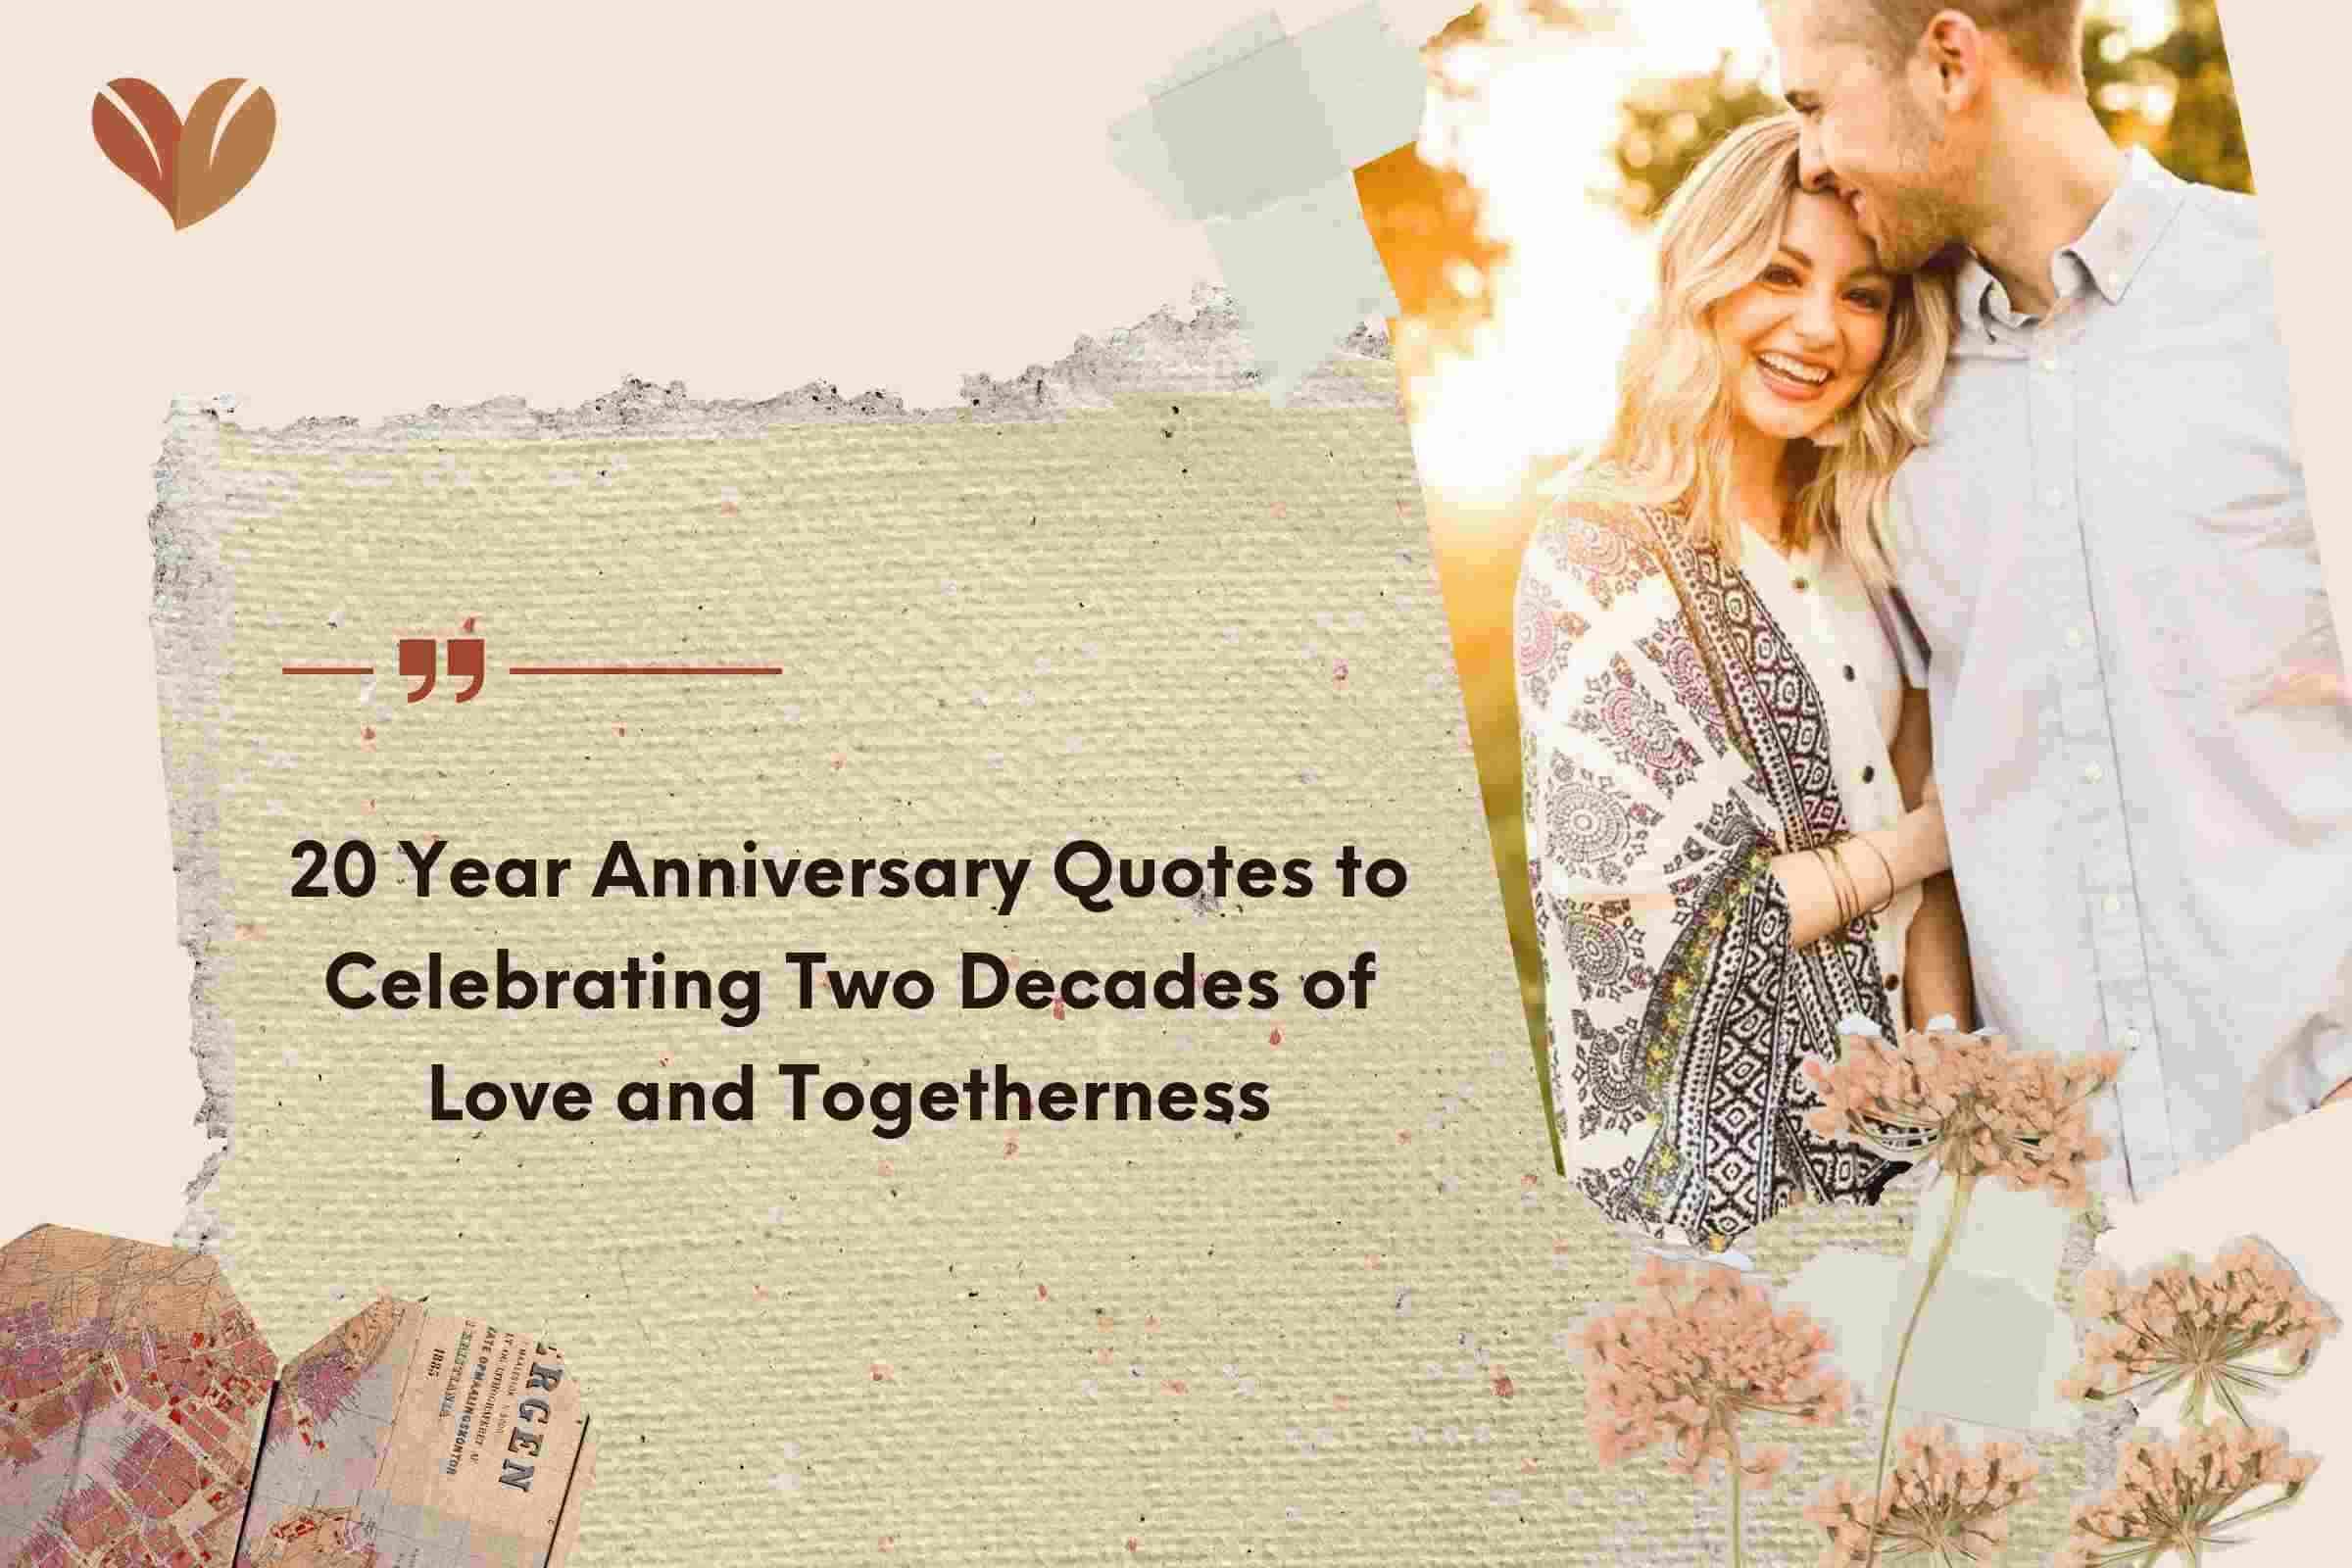 100+ 20 Year Anniversary Quotes: Love & Togetherness